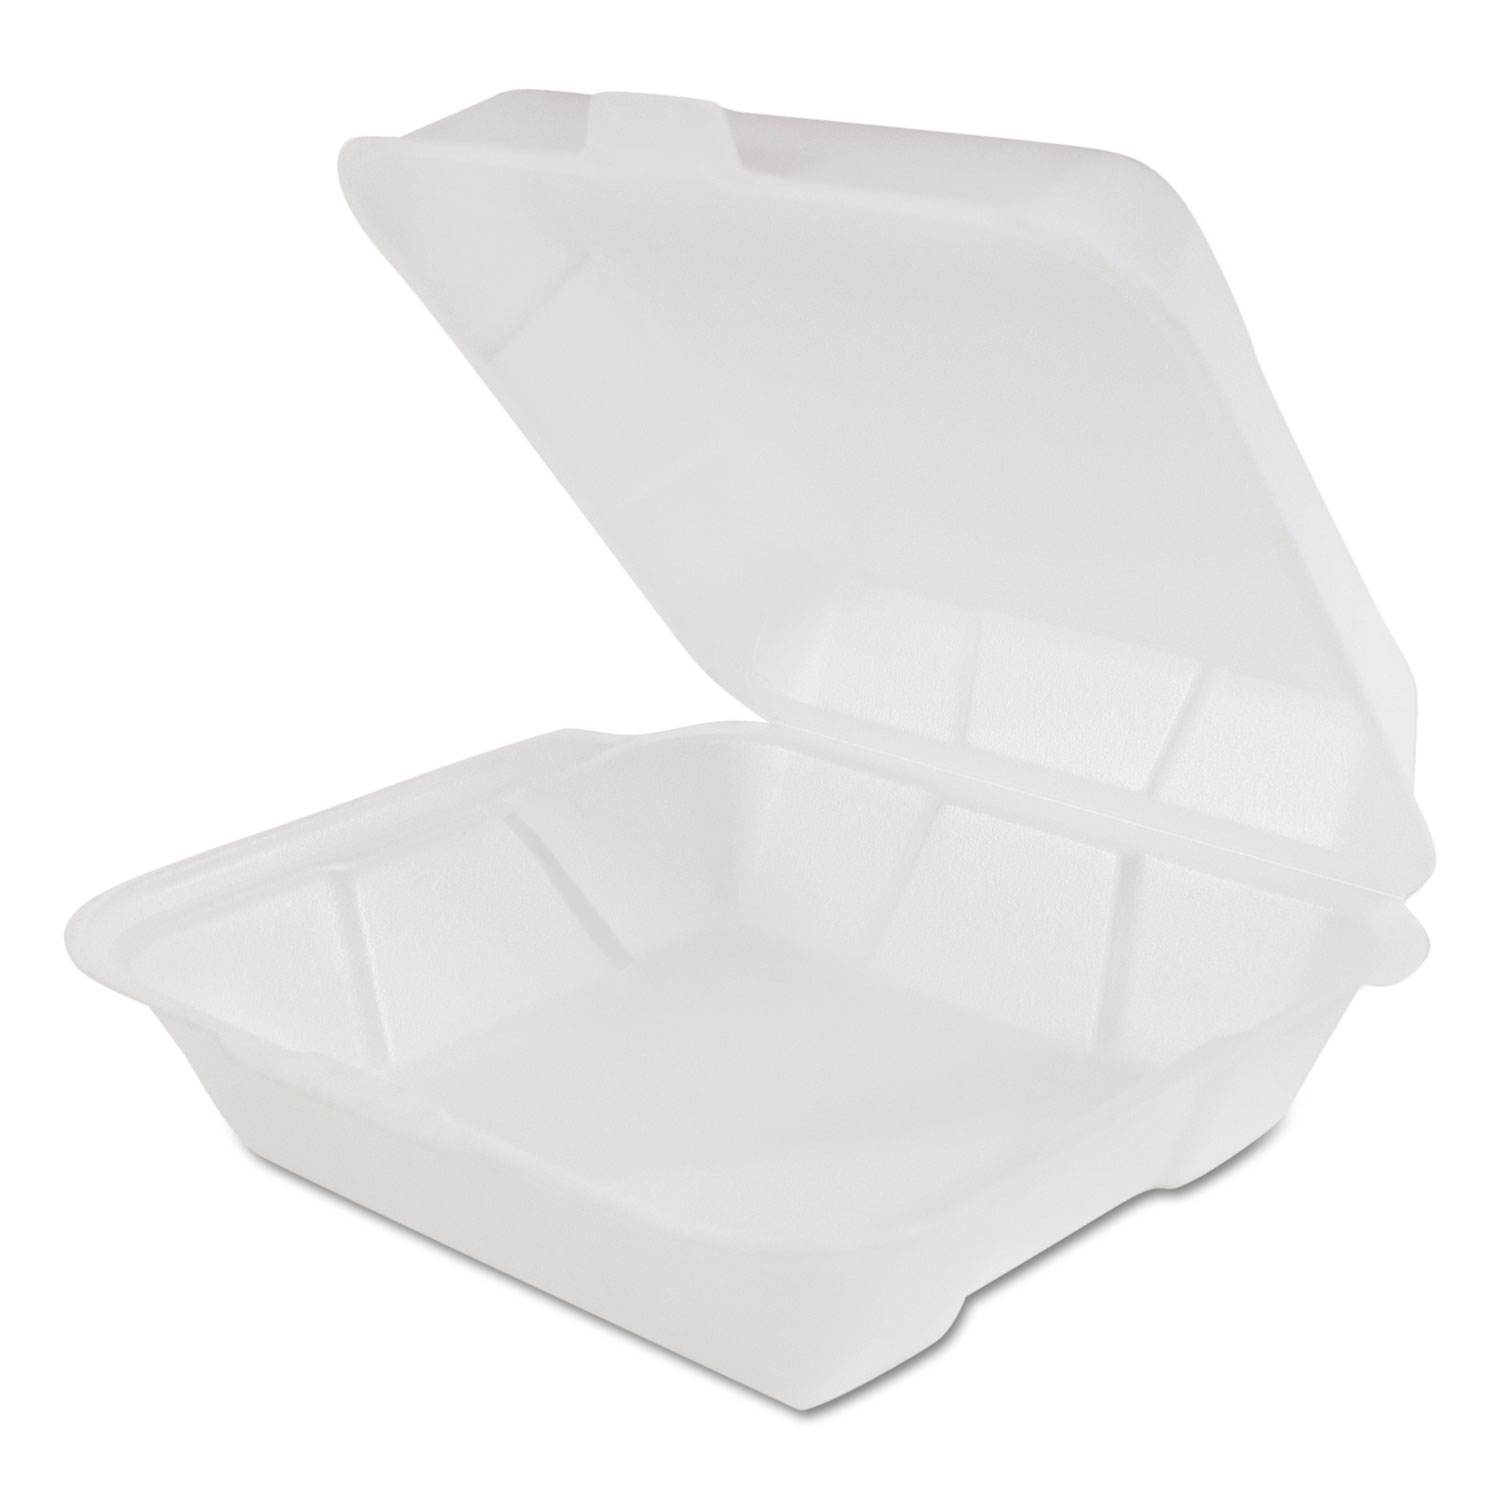 Snap-It Foam Hinged Carryout Container, SM, 1-Compartment, White, 100/BG, 2/CT